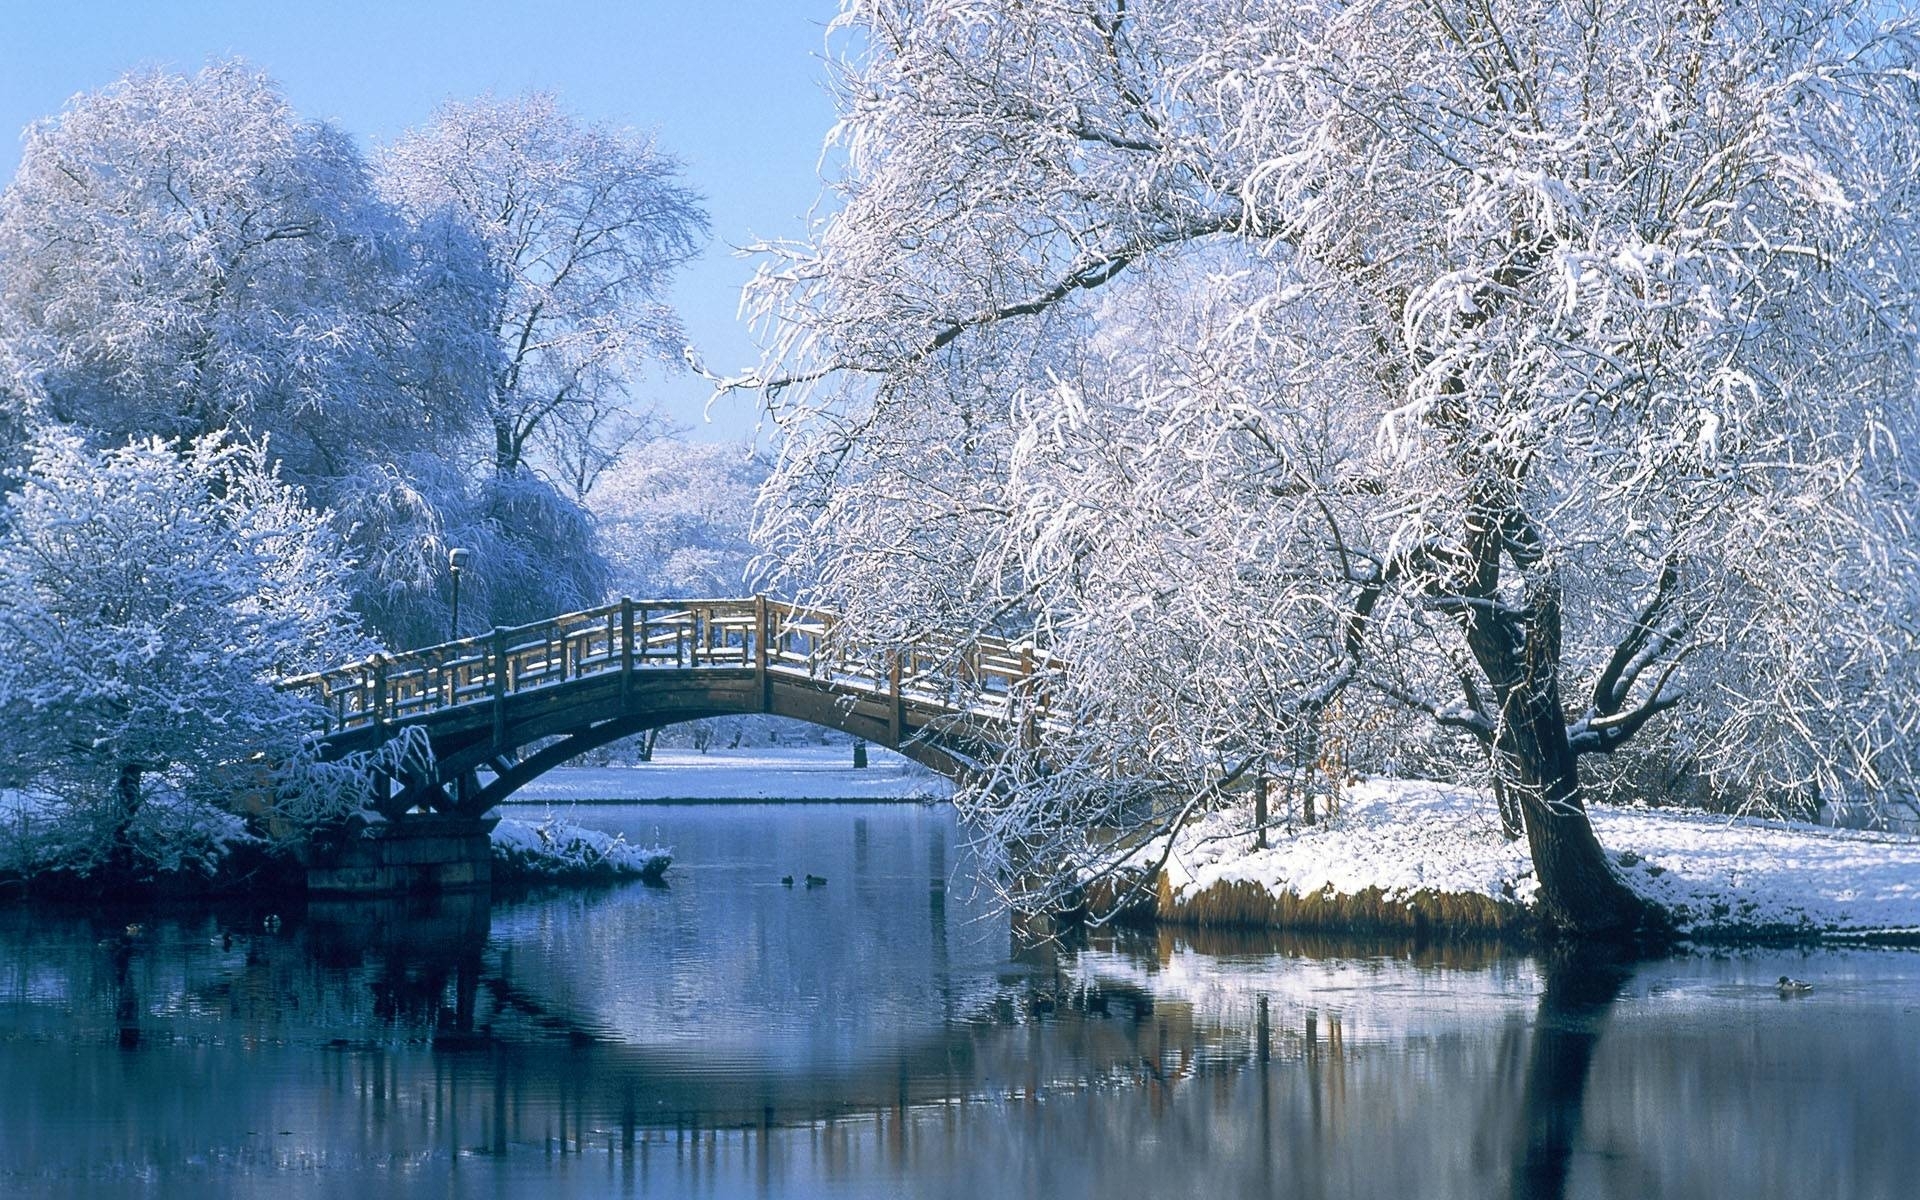 10 New Winter Scenes For Desktop Backgrounds FULL HD 1080p For PC Background